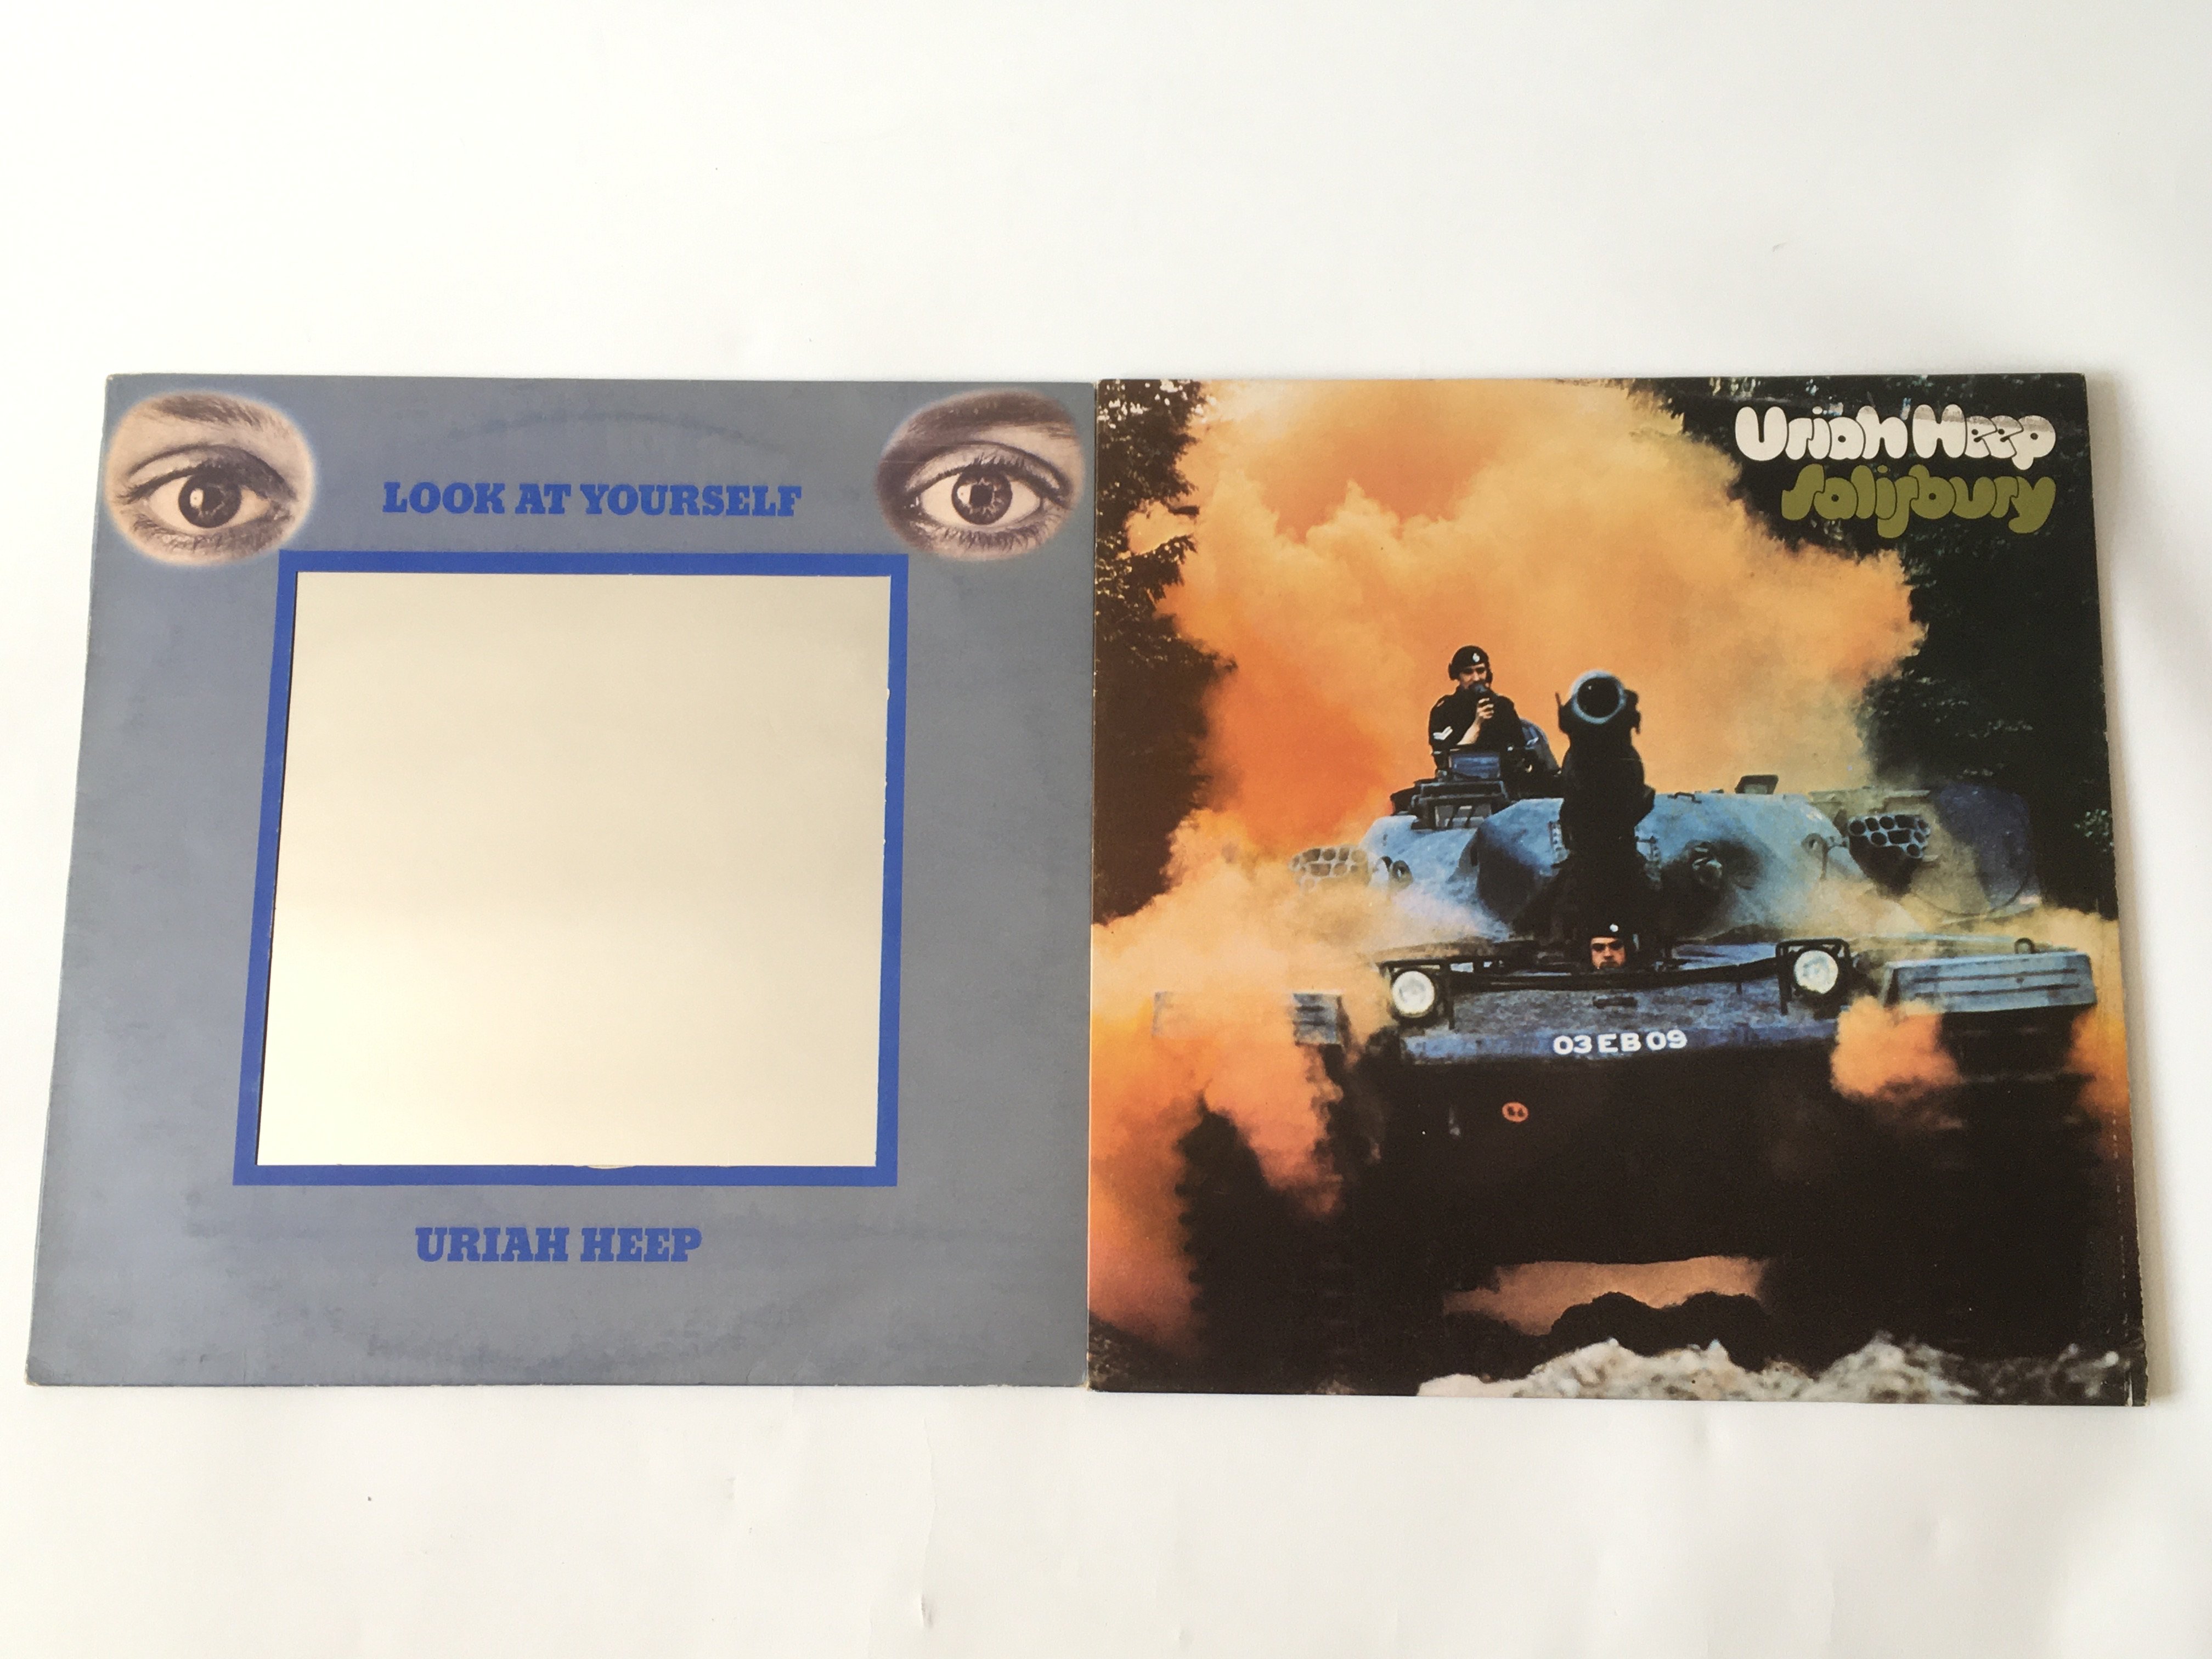 Two Uriah Heep LPs comprising 'Look At Yourself' and 'Salisbury'. Condition of both is VG+.